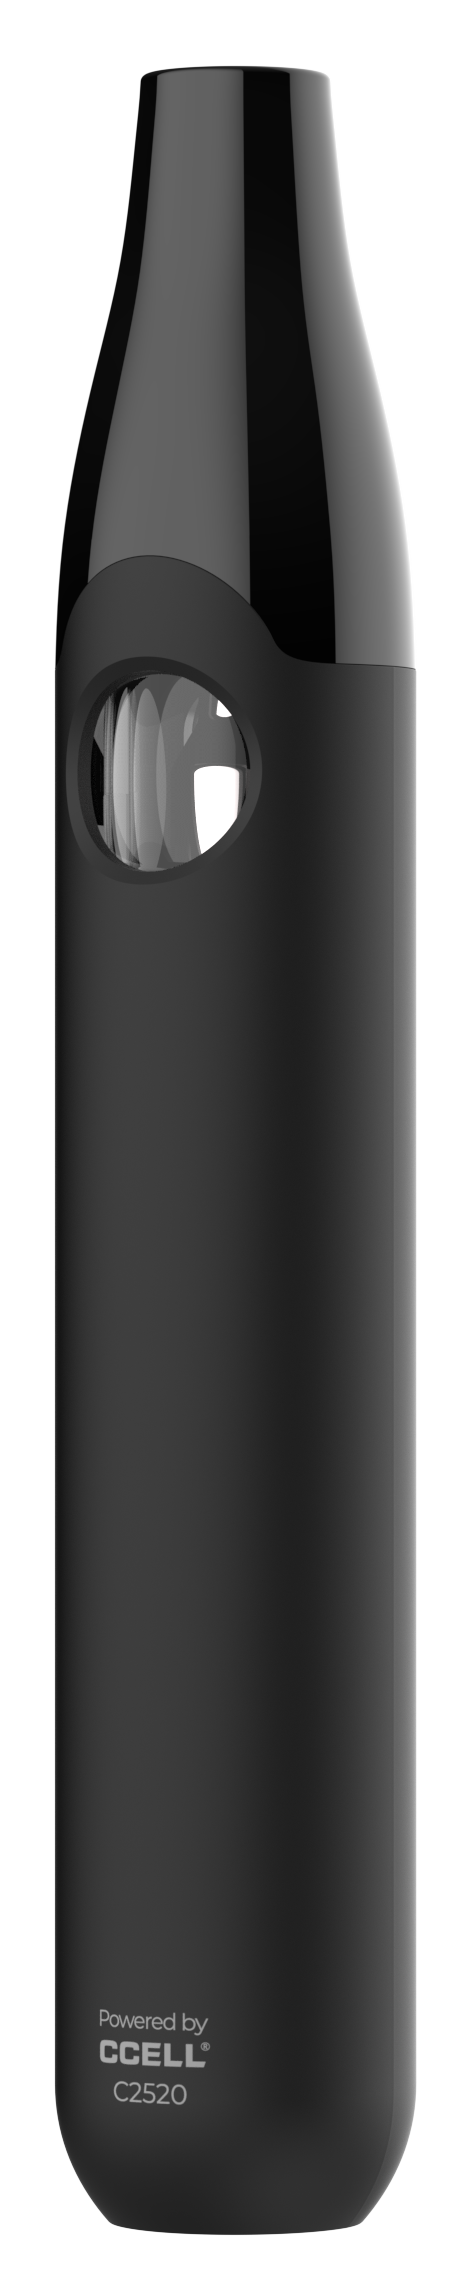 A CCELL Sima disposable vape